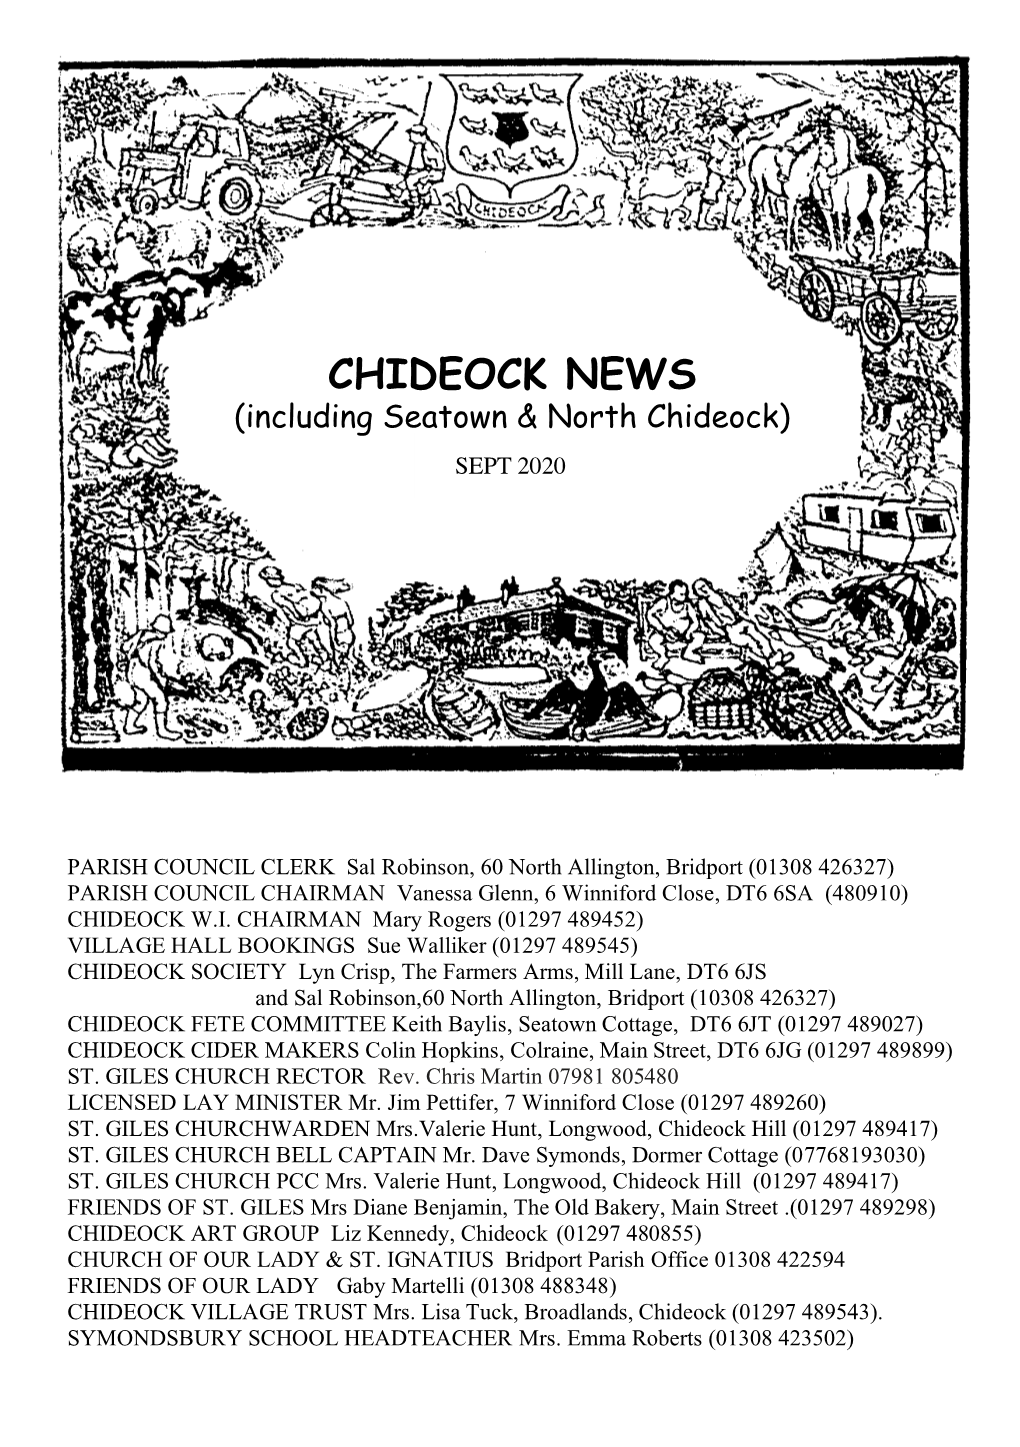 CHIDEOCK NEWS CHIDEOCK NEWS (Including Seatown & North Chideock) (Including Seatown & North Chideock) CHIDEOCKSEPT 20 NEWS (Including Seatownapr & 20 North Chideock)